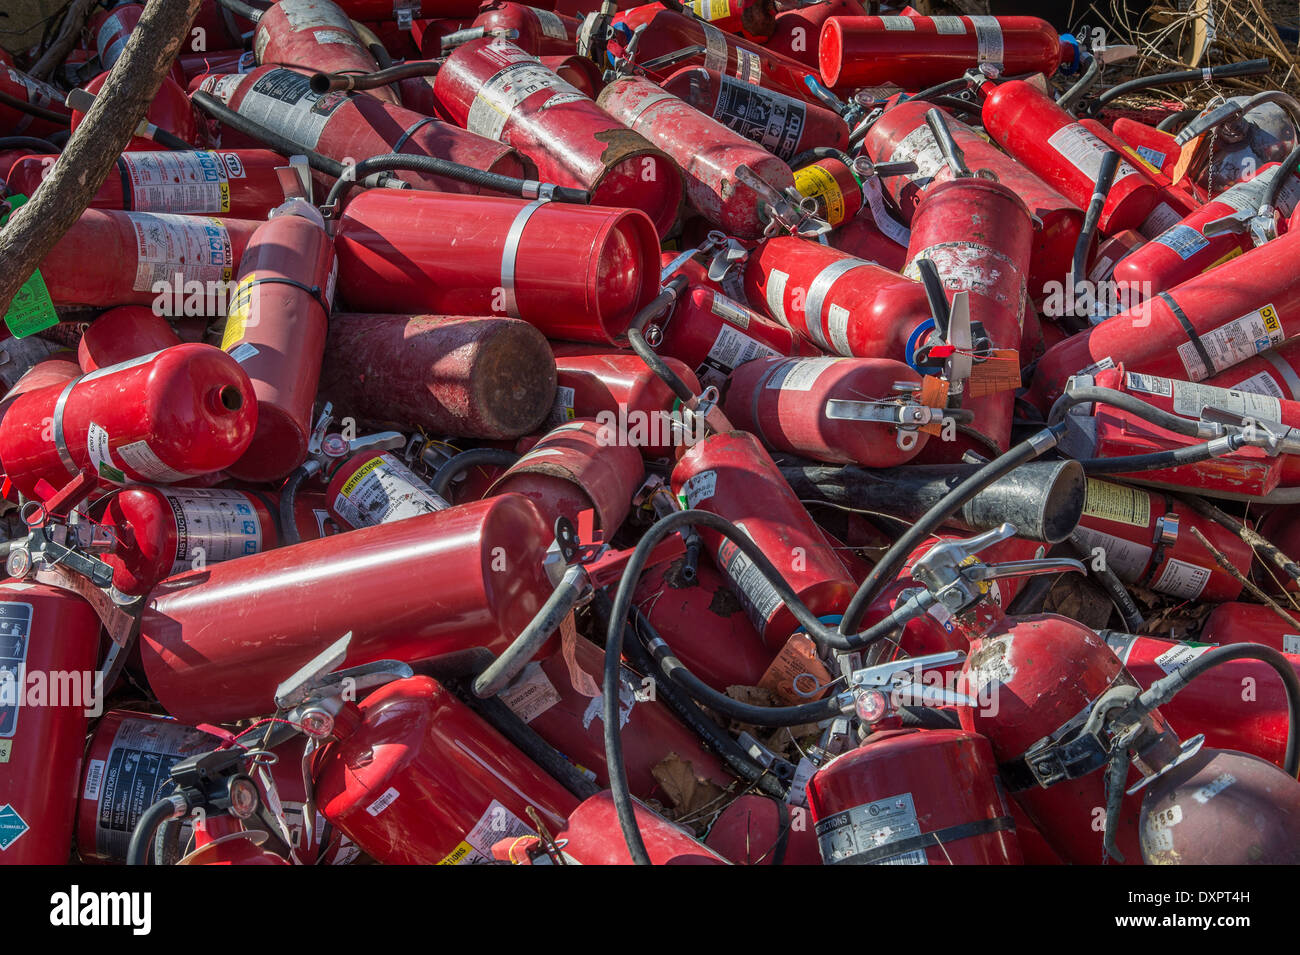 Pile Of Old Used Fire Extinguishers Stock Photo